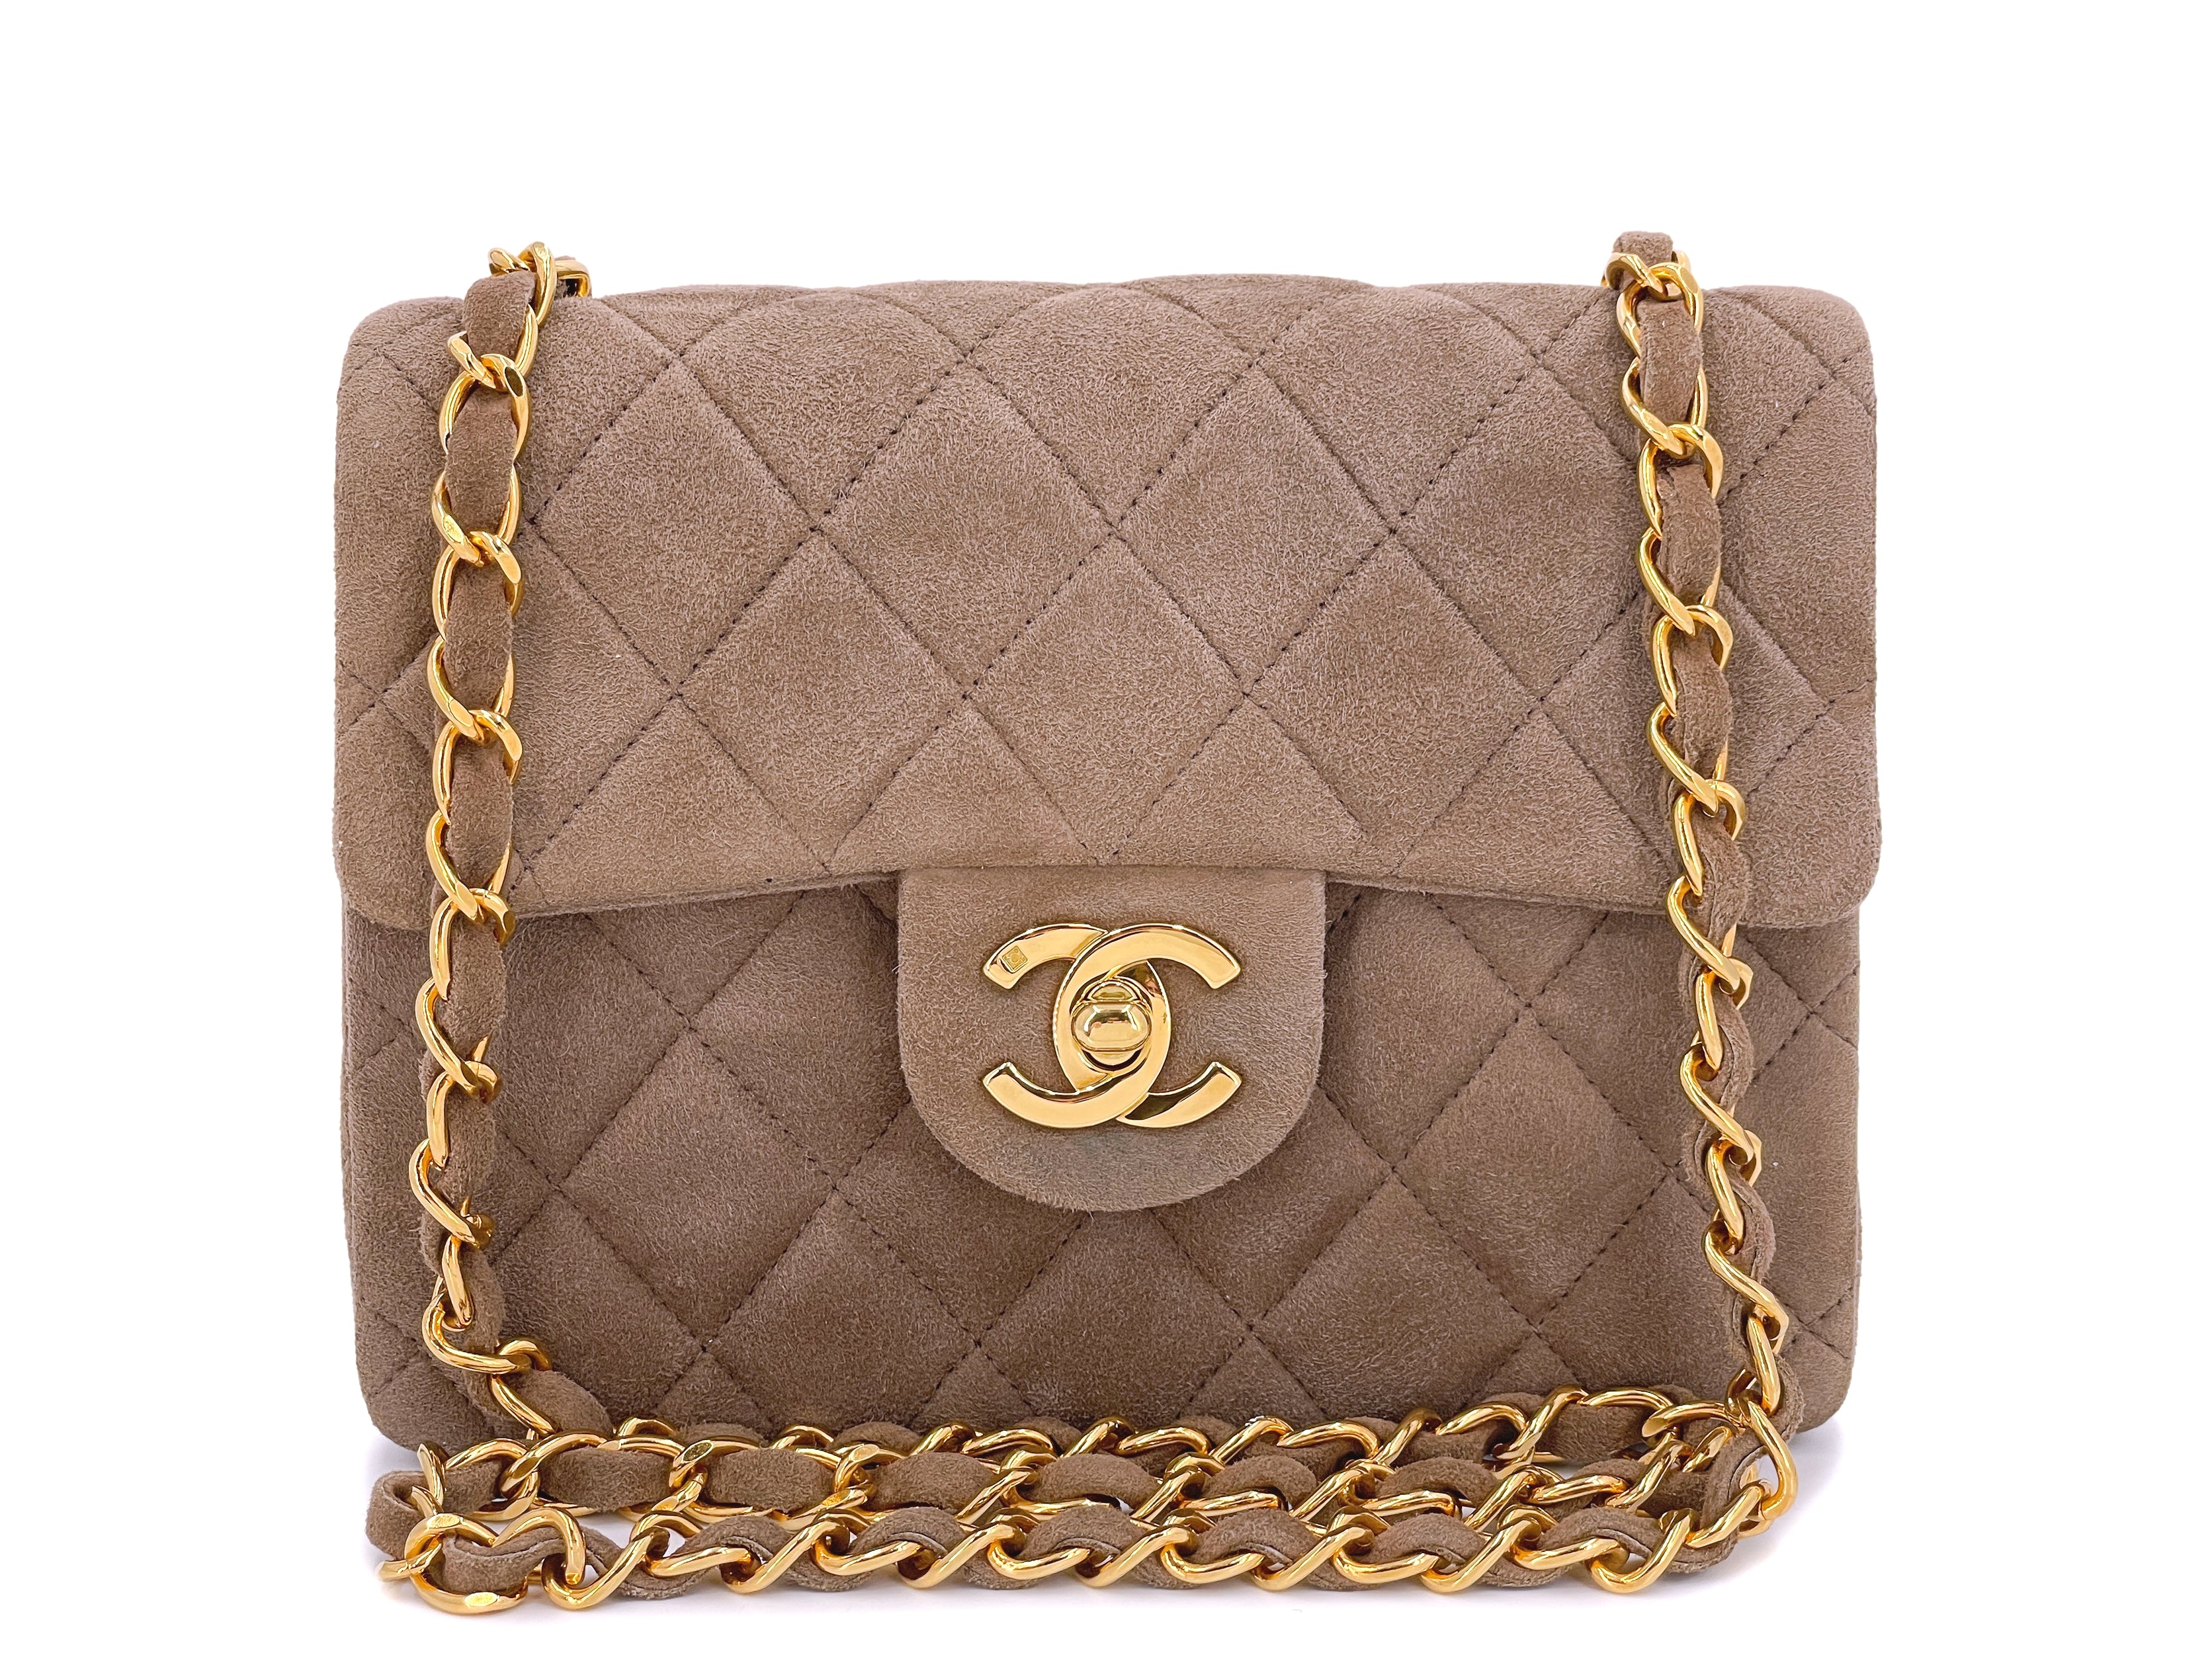 chanel flap bag brown leather